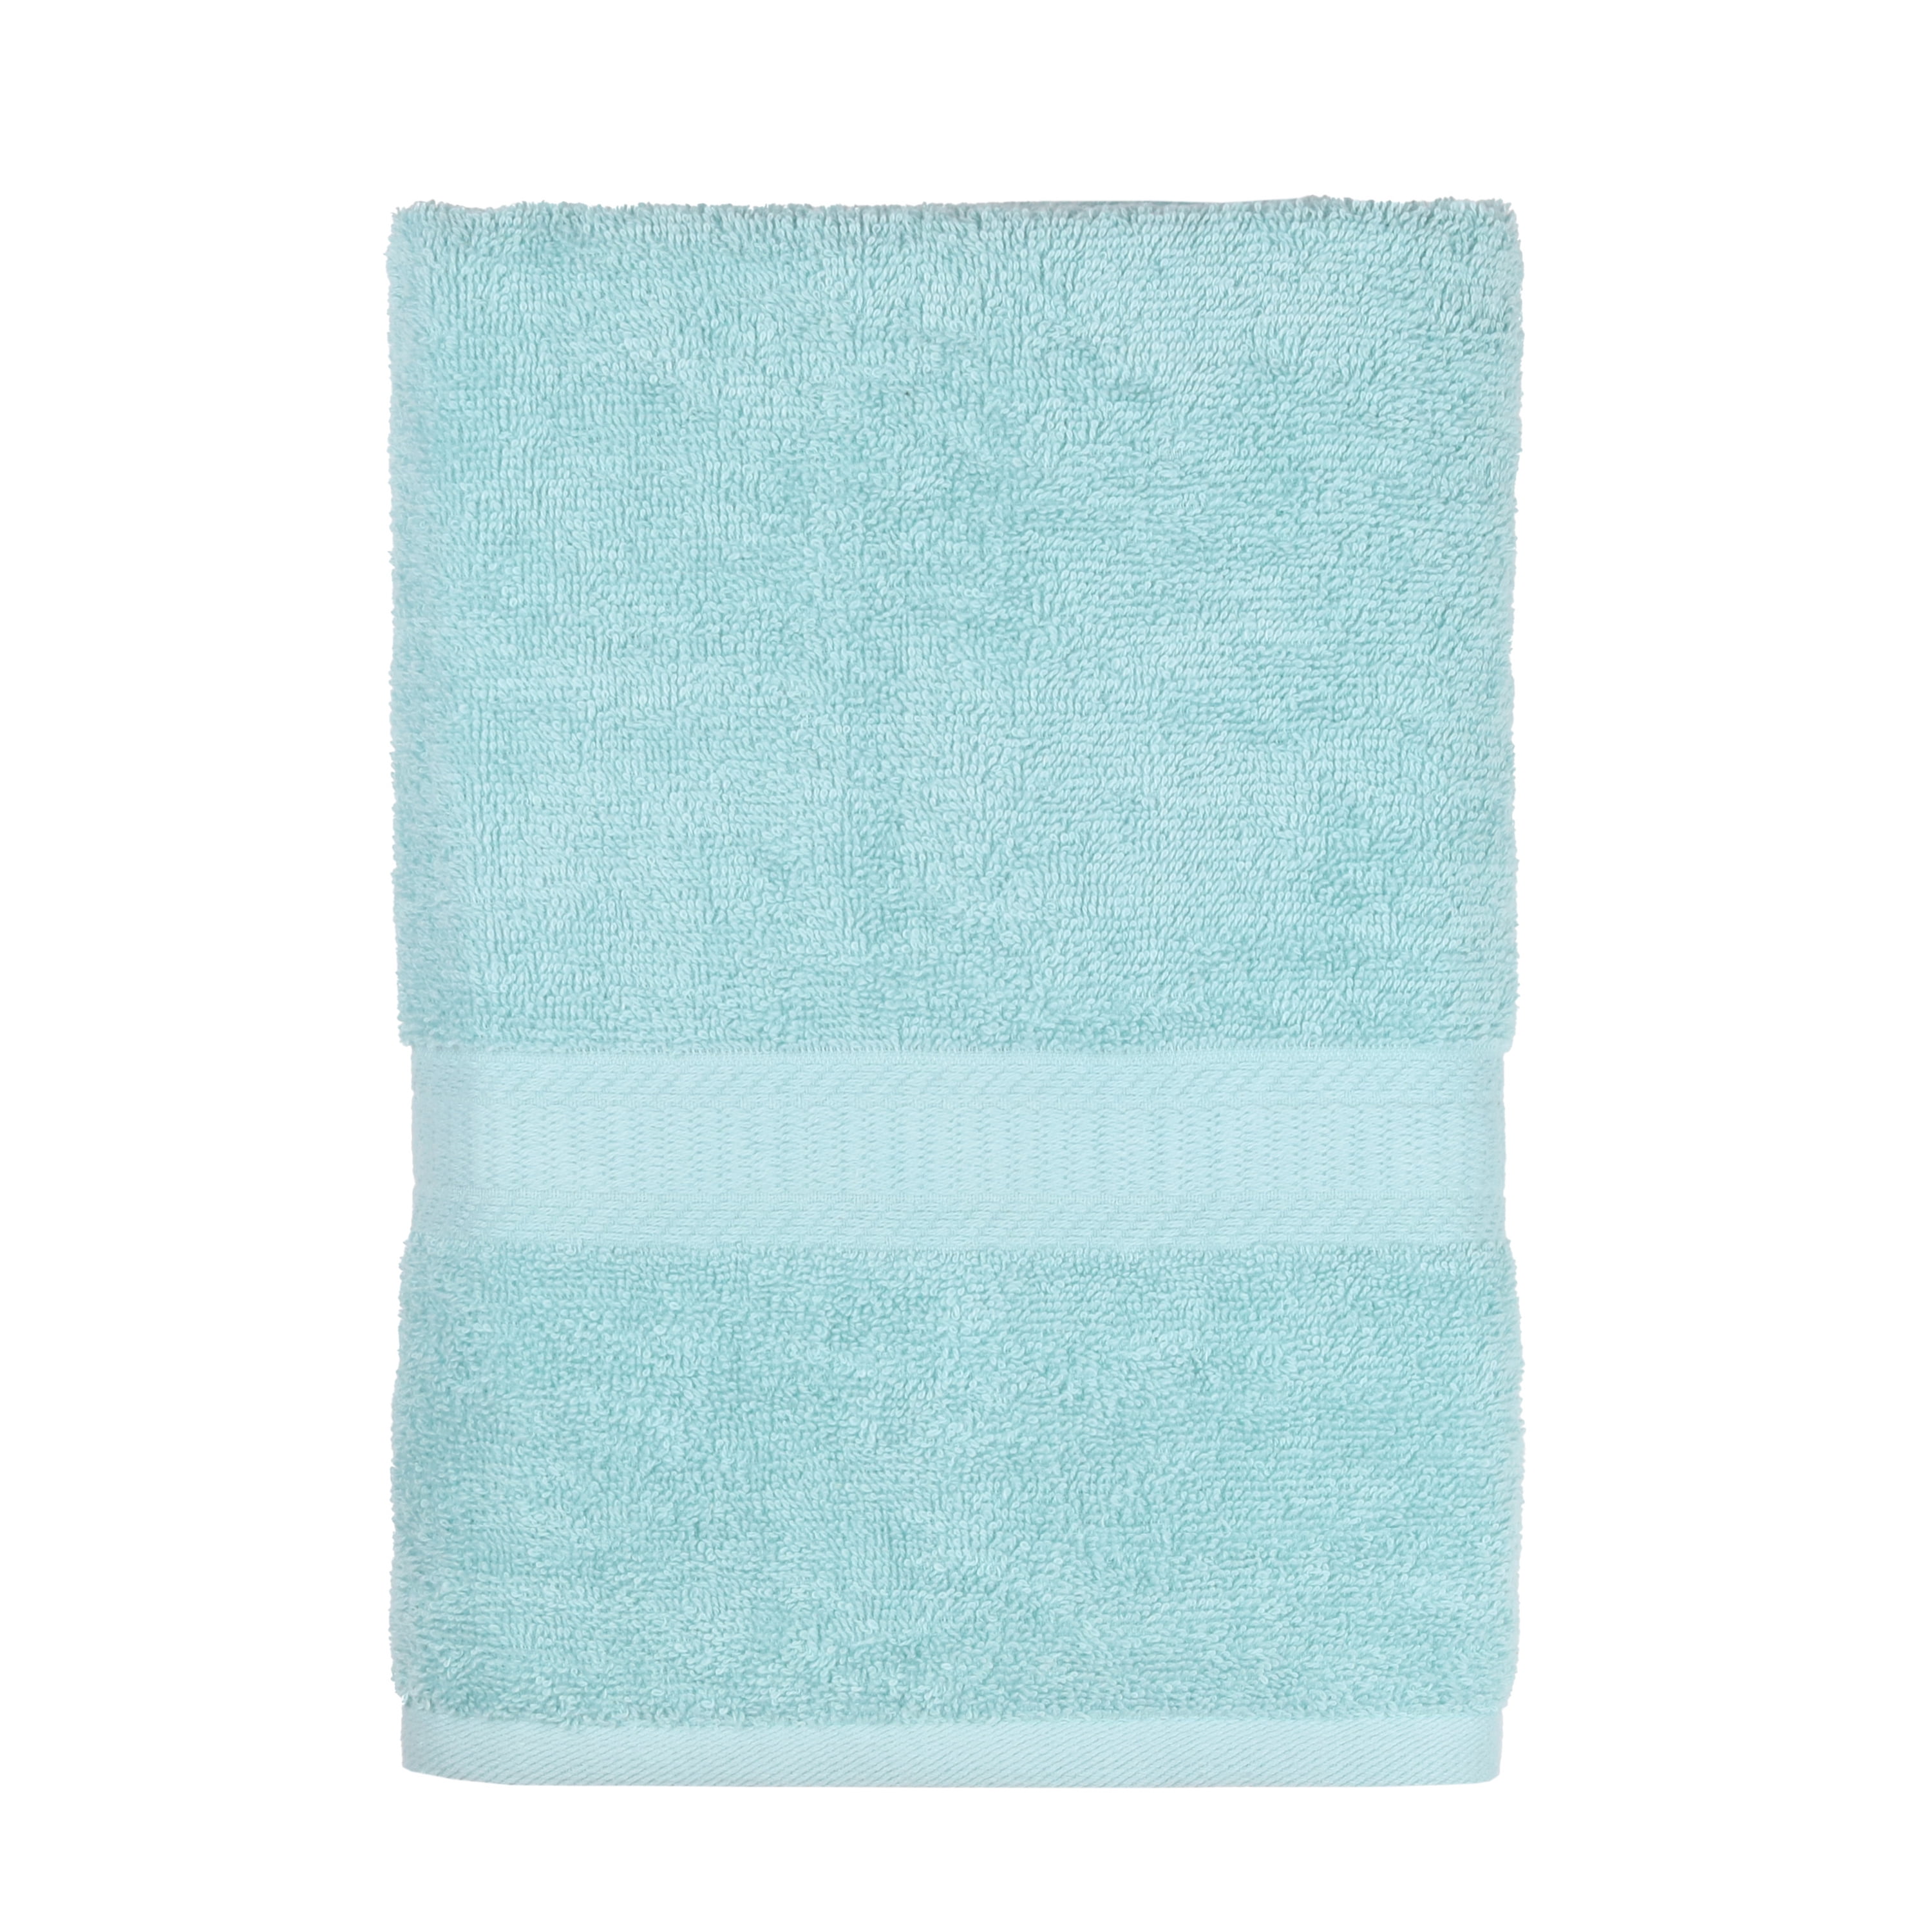 Living :: Bath & bed linen :: BYFT Spring Hand Towel 50 x 100 Cm 100%  MICROFIBER Set of 1, 450 GSM Highly Absorbent Quick Dry High Quality Bath  Linen